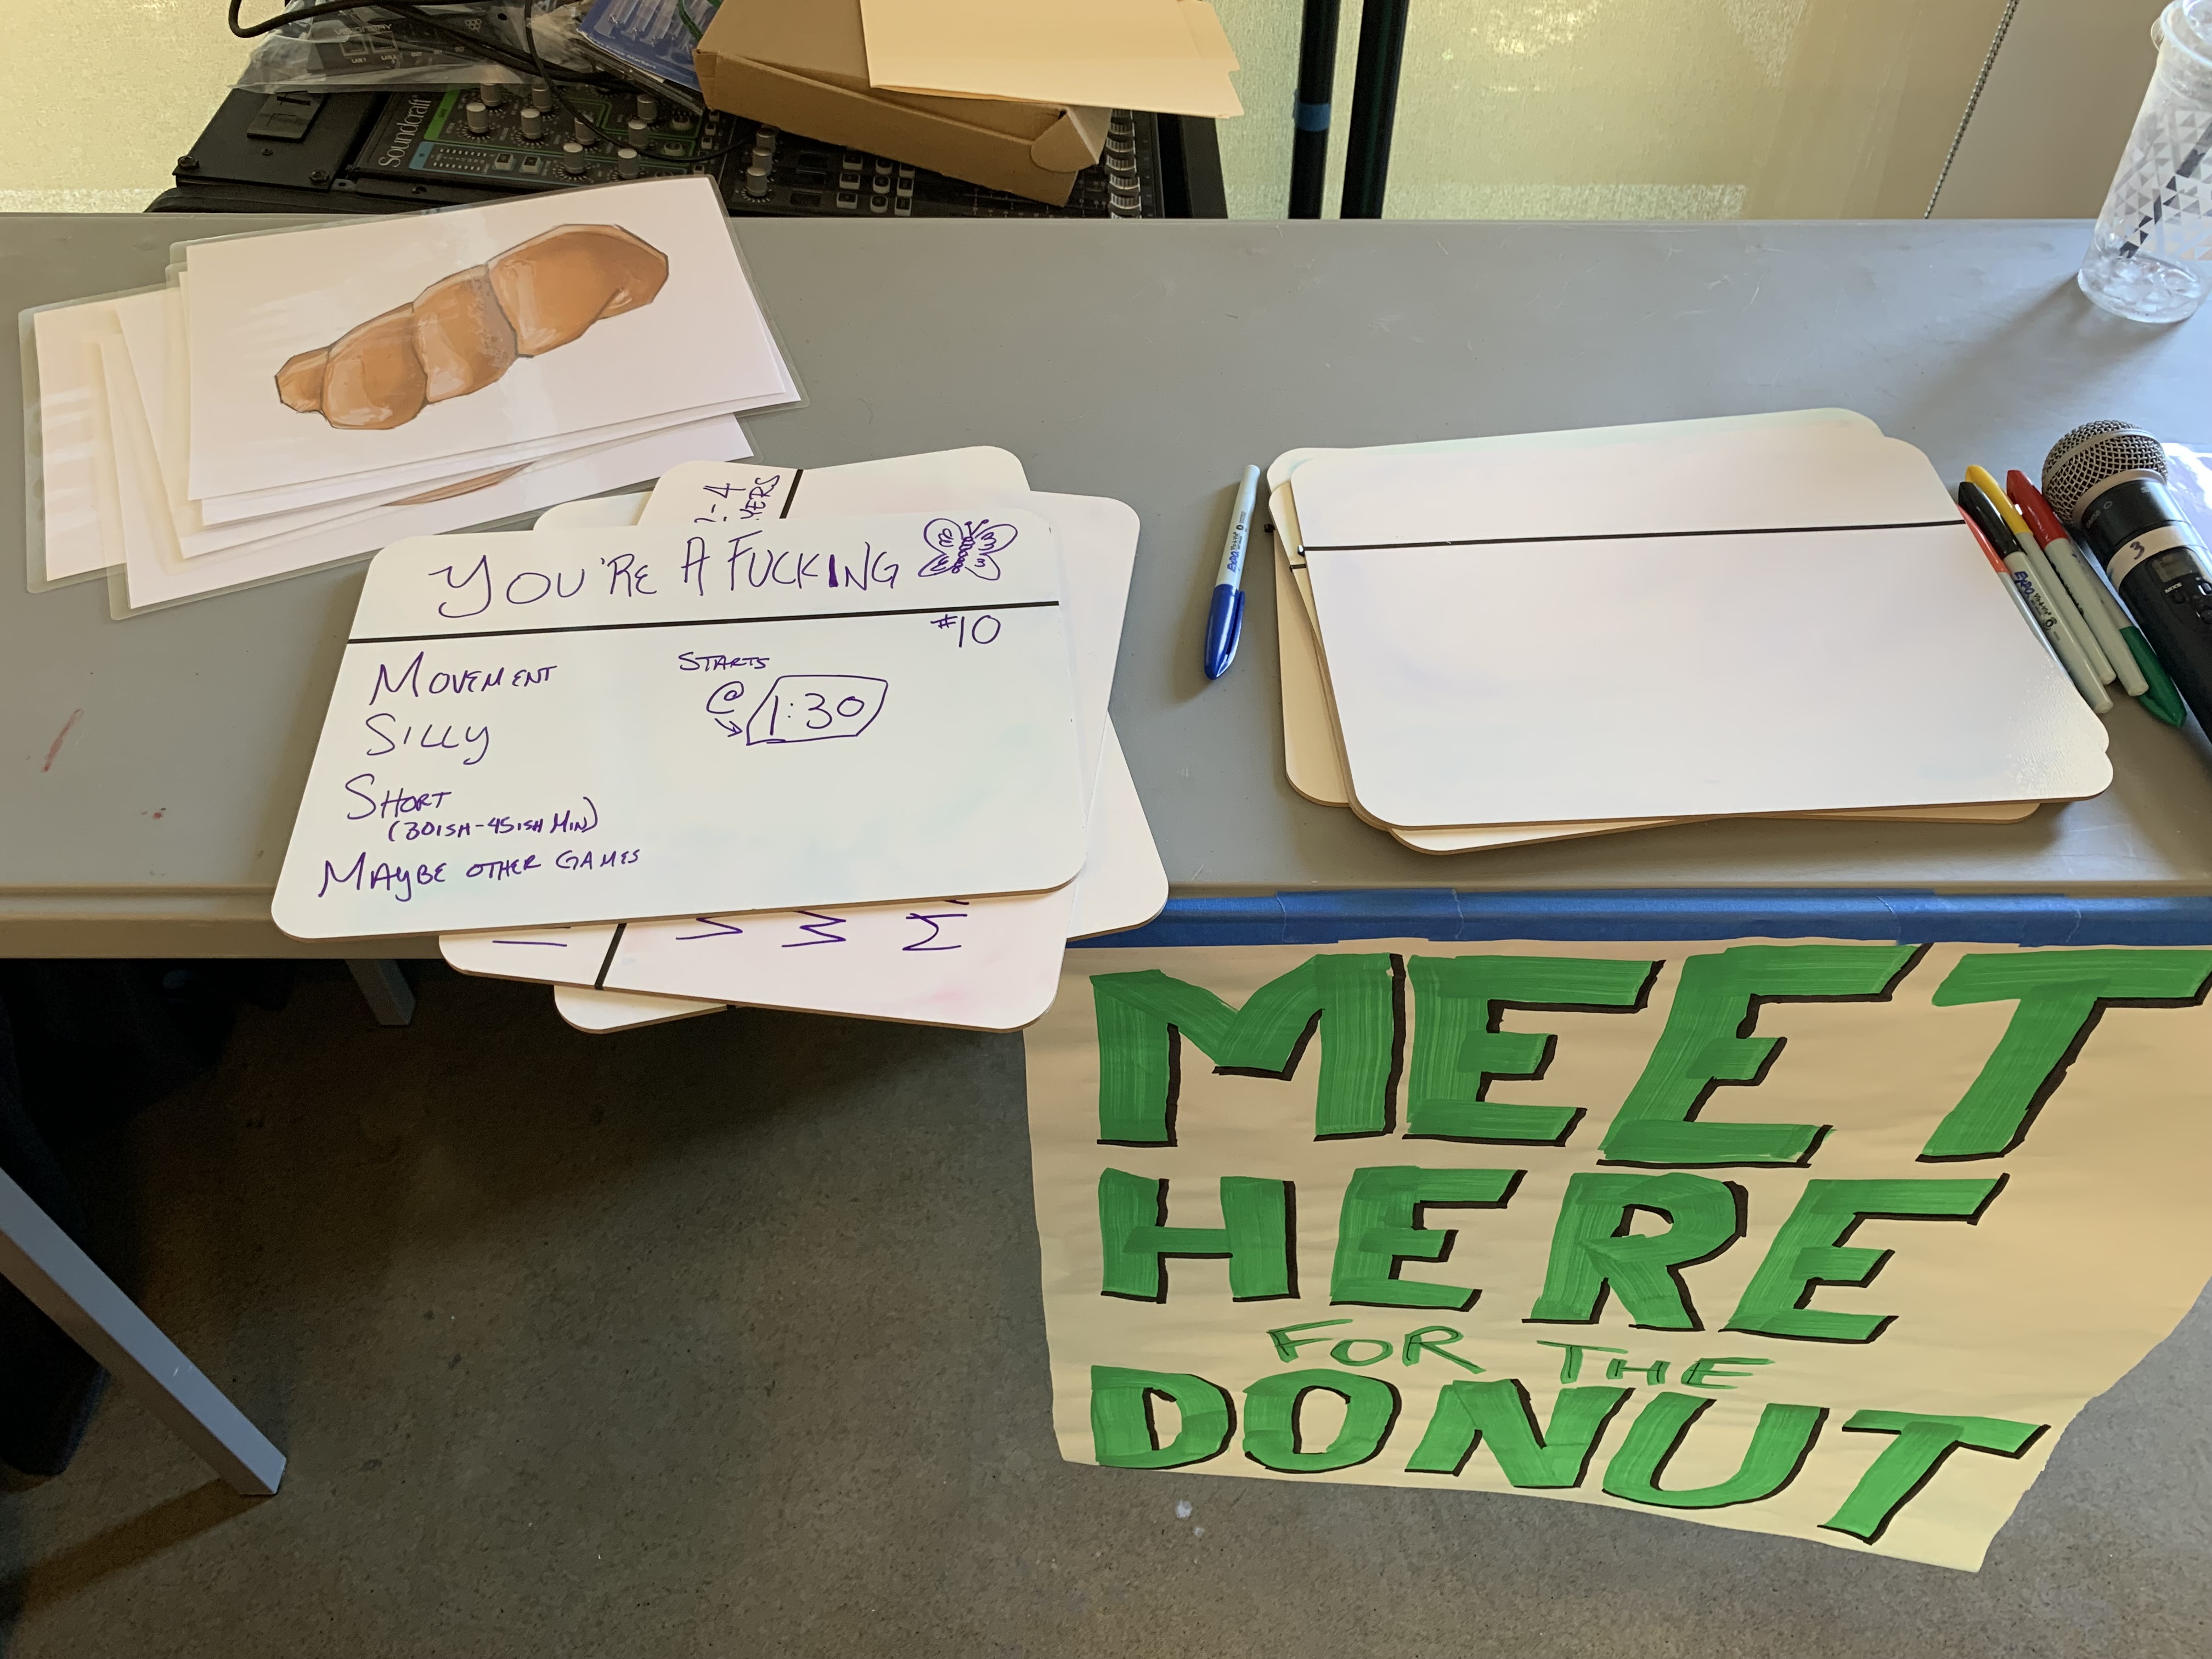 Photograph of the Donut sign-up table with a sign saying "Meet here for the Donut" and an example of a game pitch.